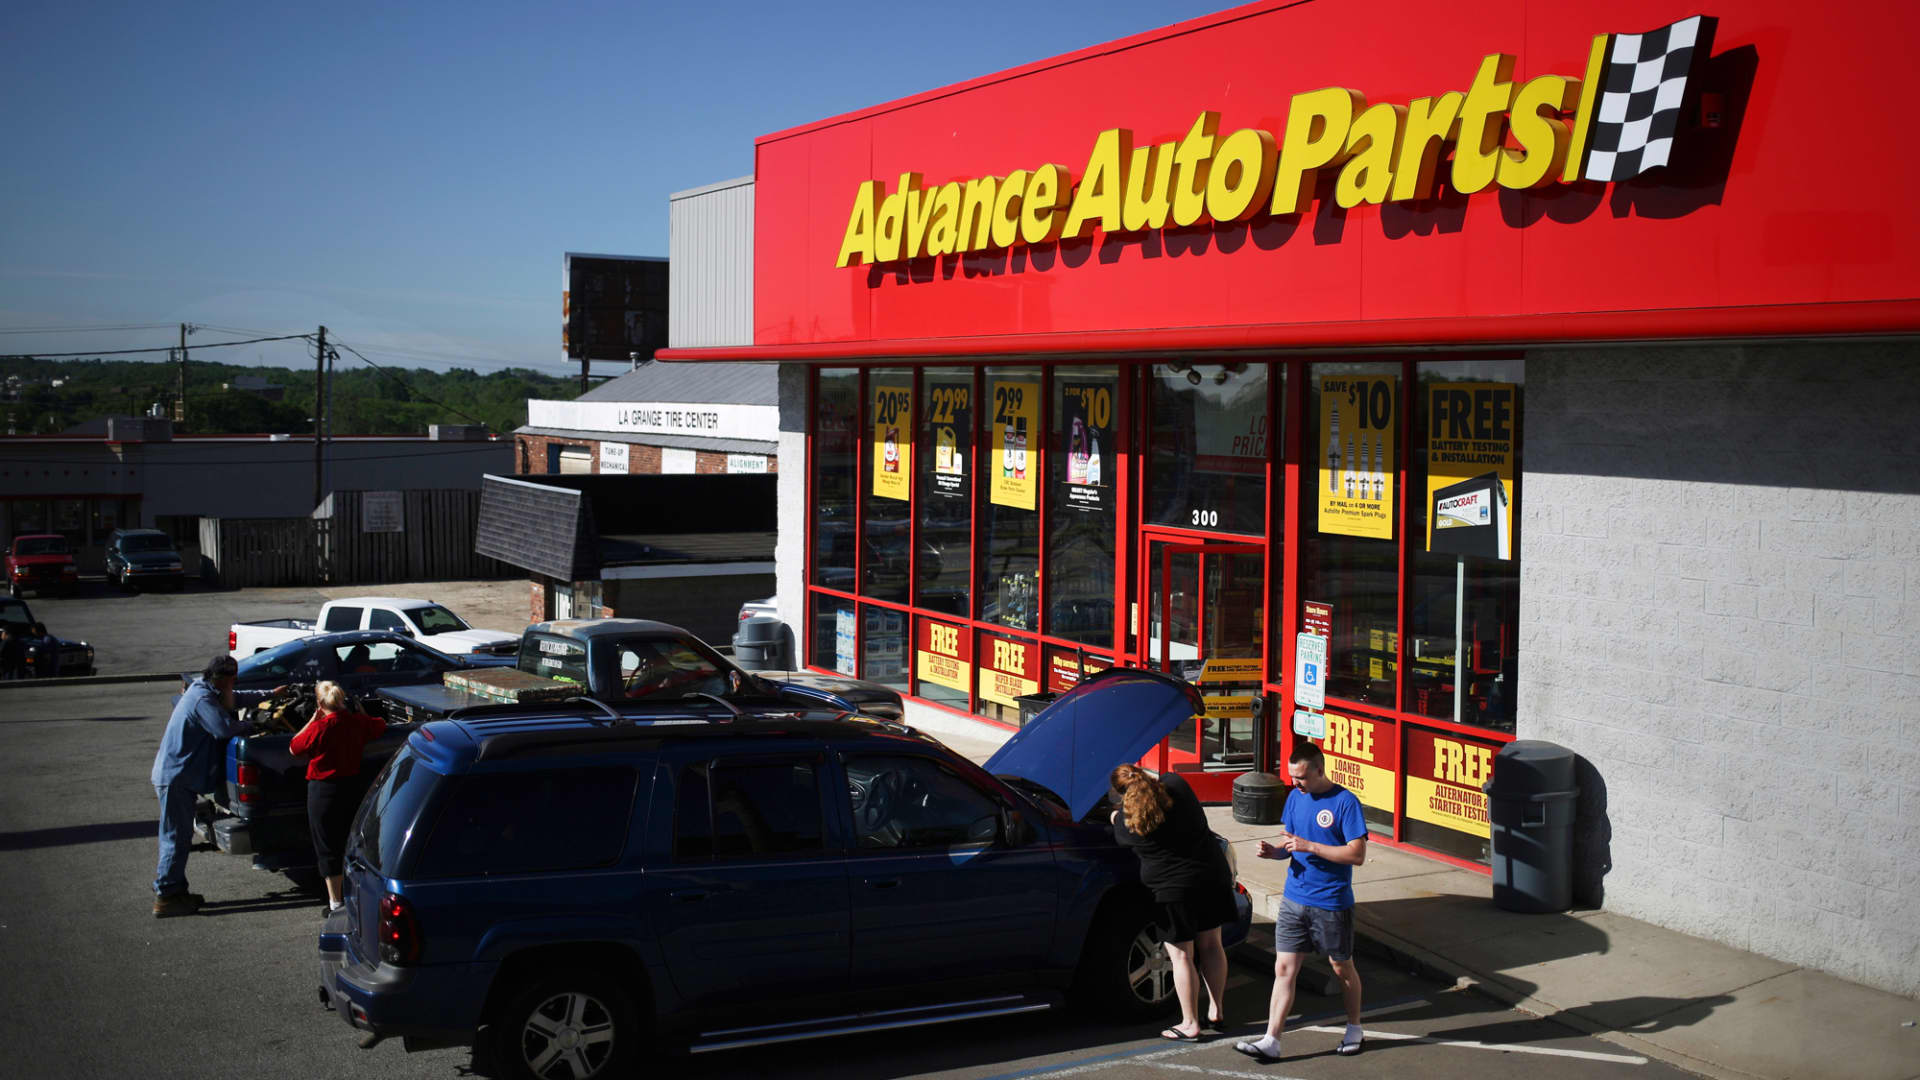 How a Major Car Parts Company Got Hacked The Full Story Behind Advance Auto Parts' Data Leak----